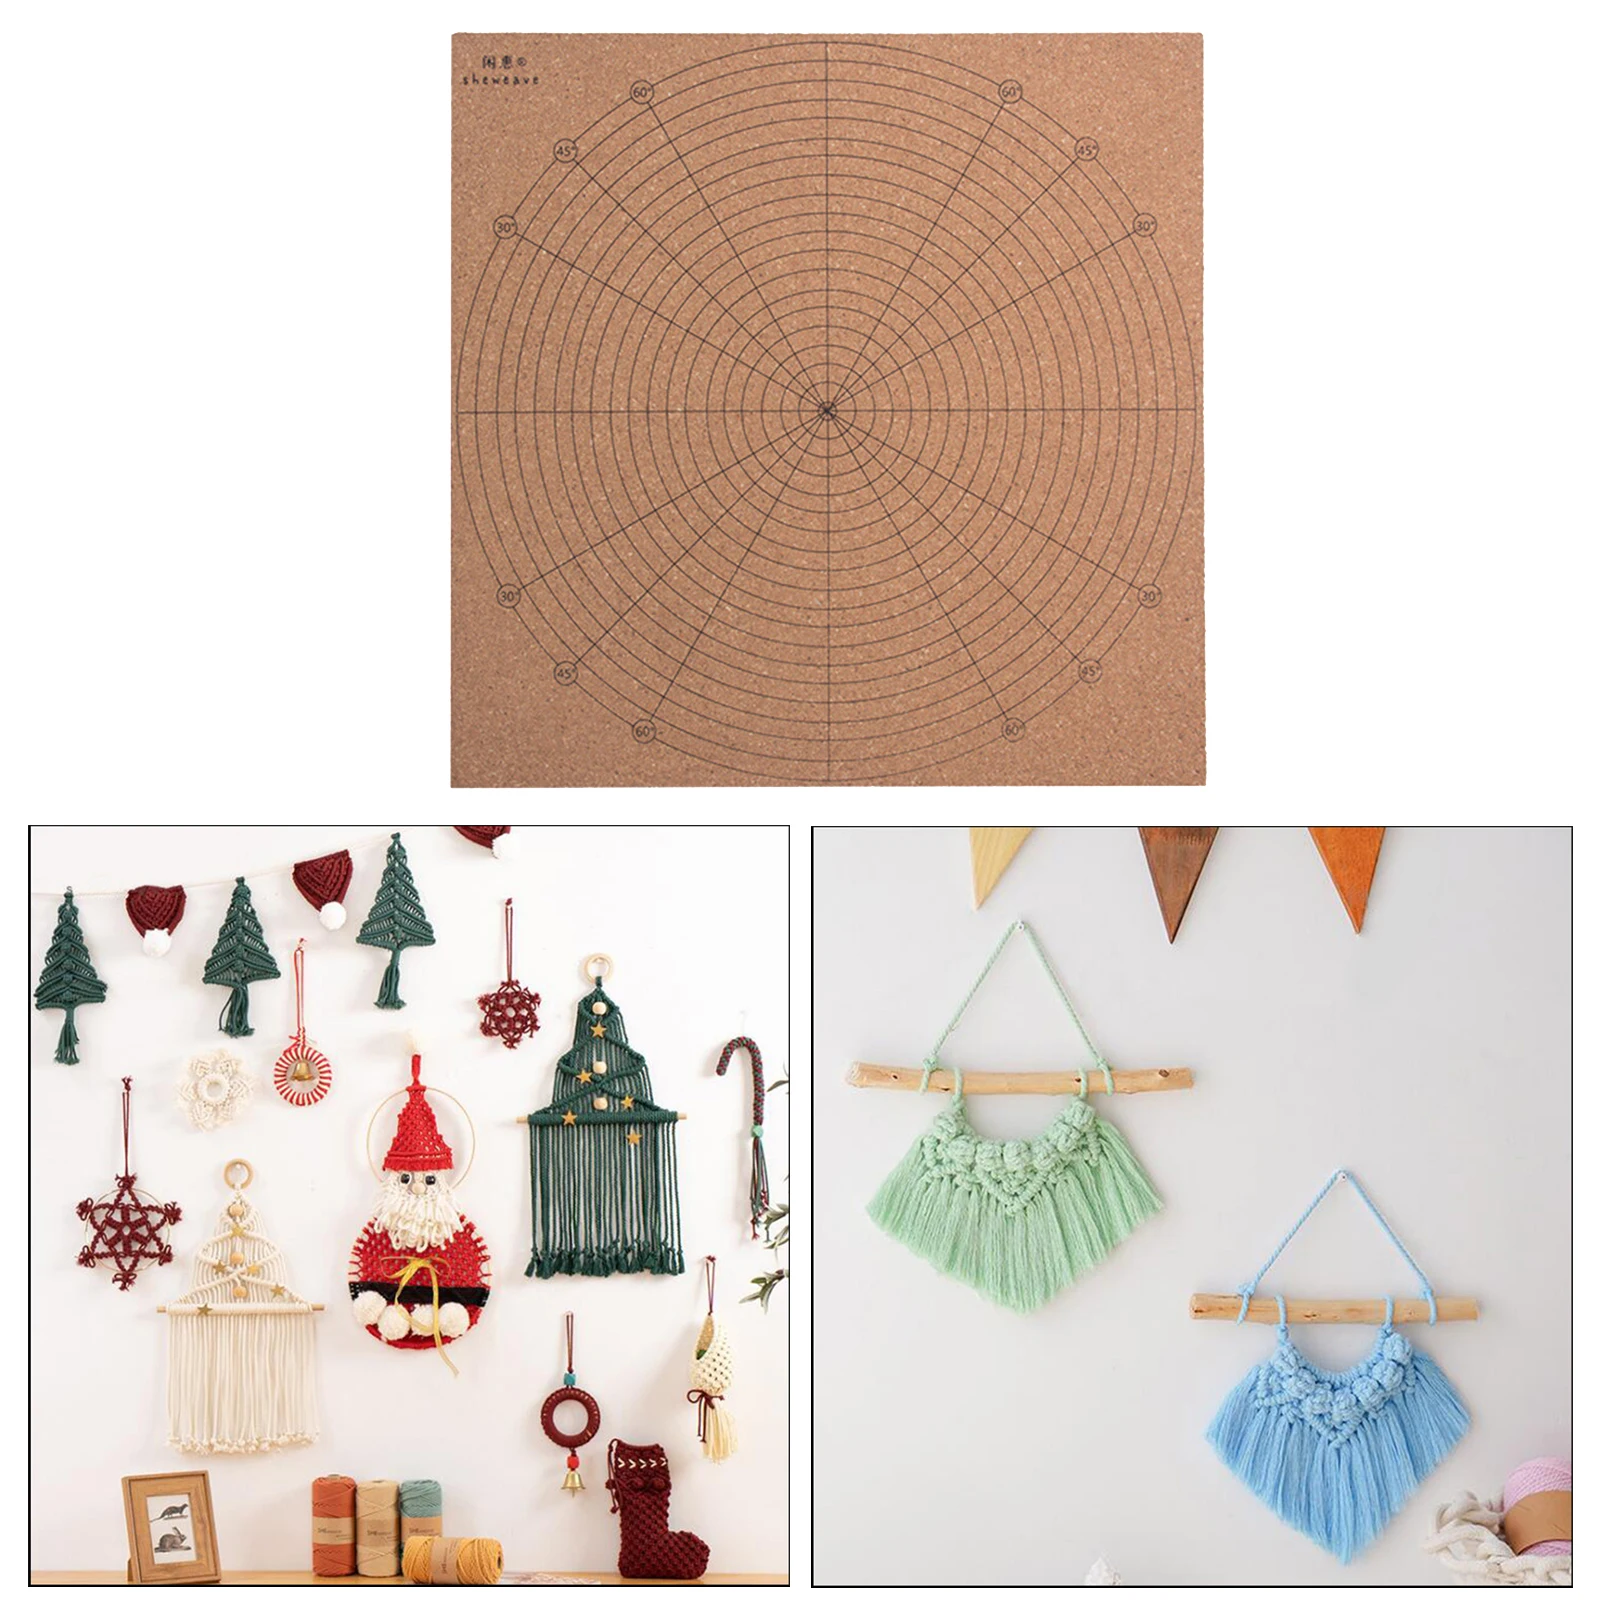 Crafts Blocking Mats for Knitting - Macrame Board with Grids for Needlepoint or Crochet